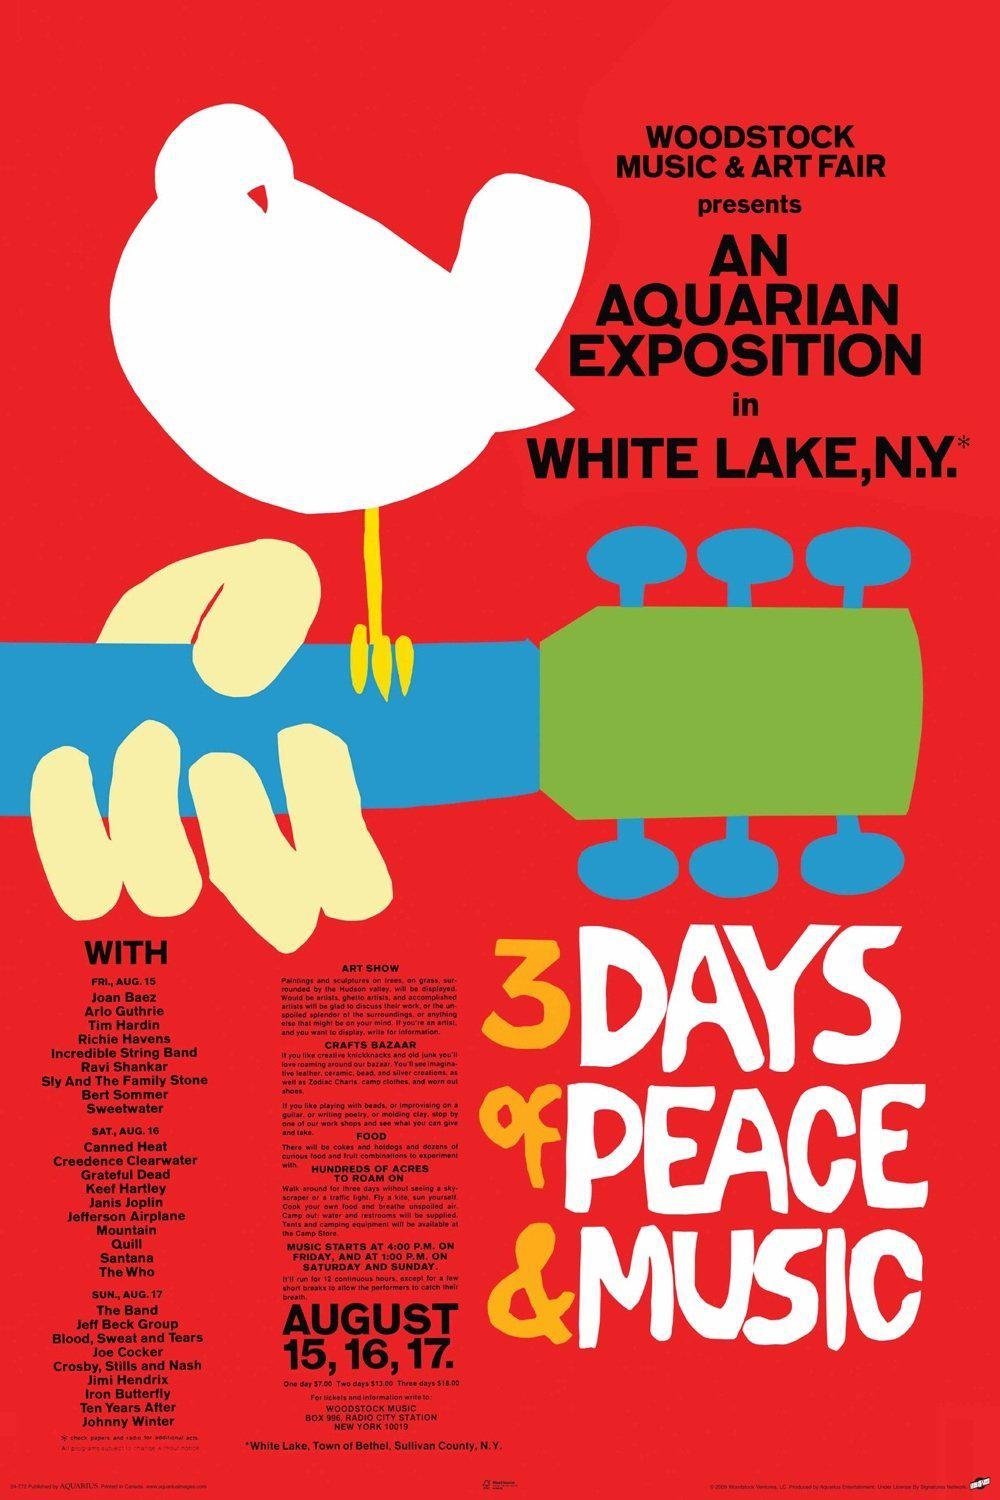 The History Of The Woodstock Festival - Part 5